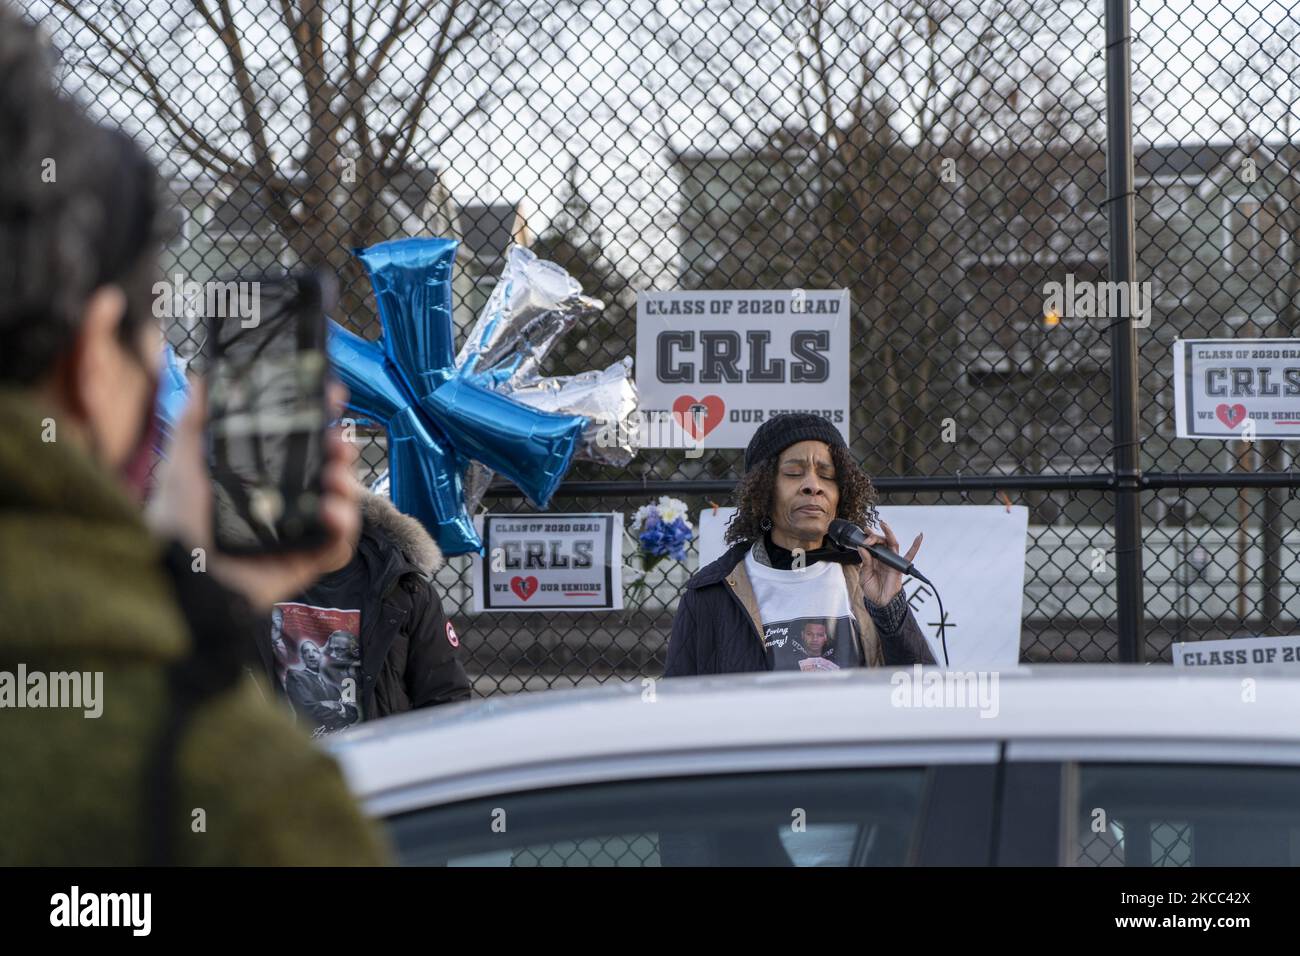 Wanda Jackson sings during a vigil in memory of Xavier Louis-Jacques, 19, of Cambridge, Massachusetts on April 3, 2021. Louis-Jacques was shot and killed a week earlier (on April 27) next to the basketball courts near his home. The young man was remembered as a well-loved student and athlete. (Photo by Jodi Hilton/NurPhoto) Stock Photo